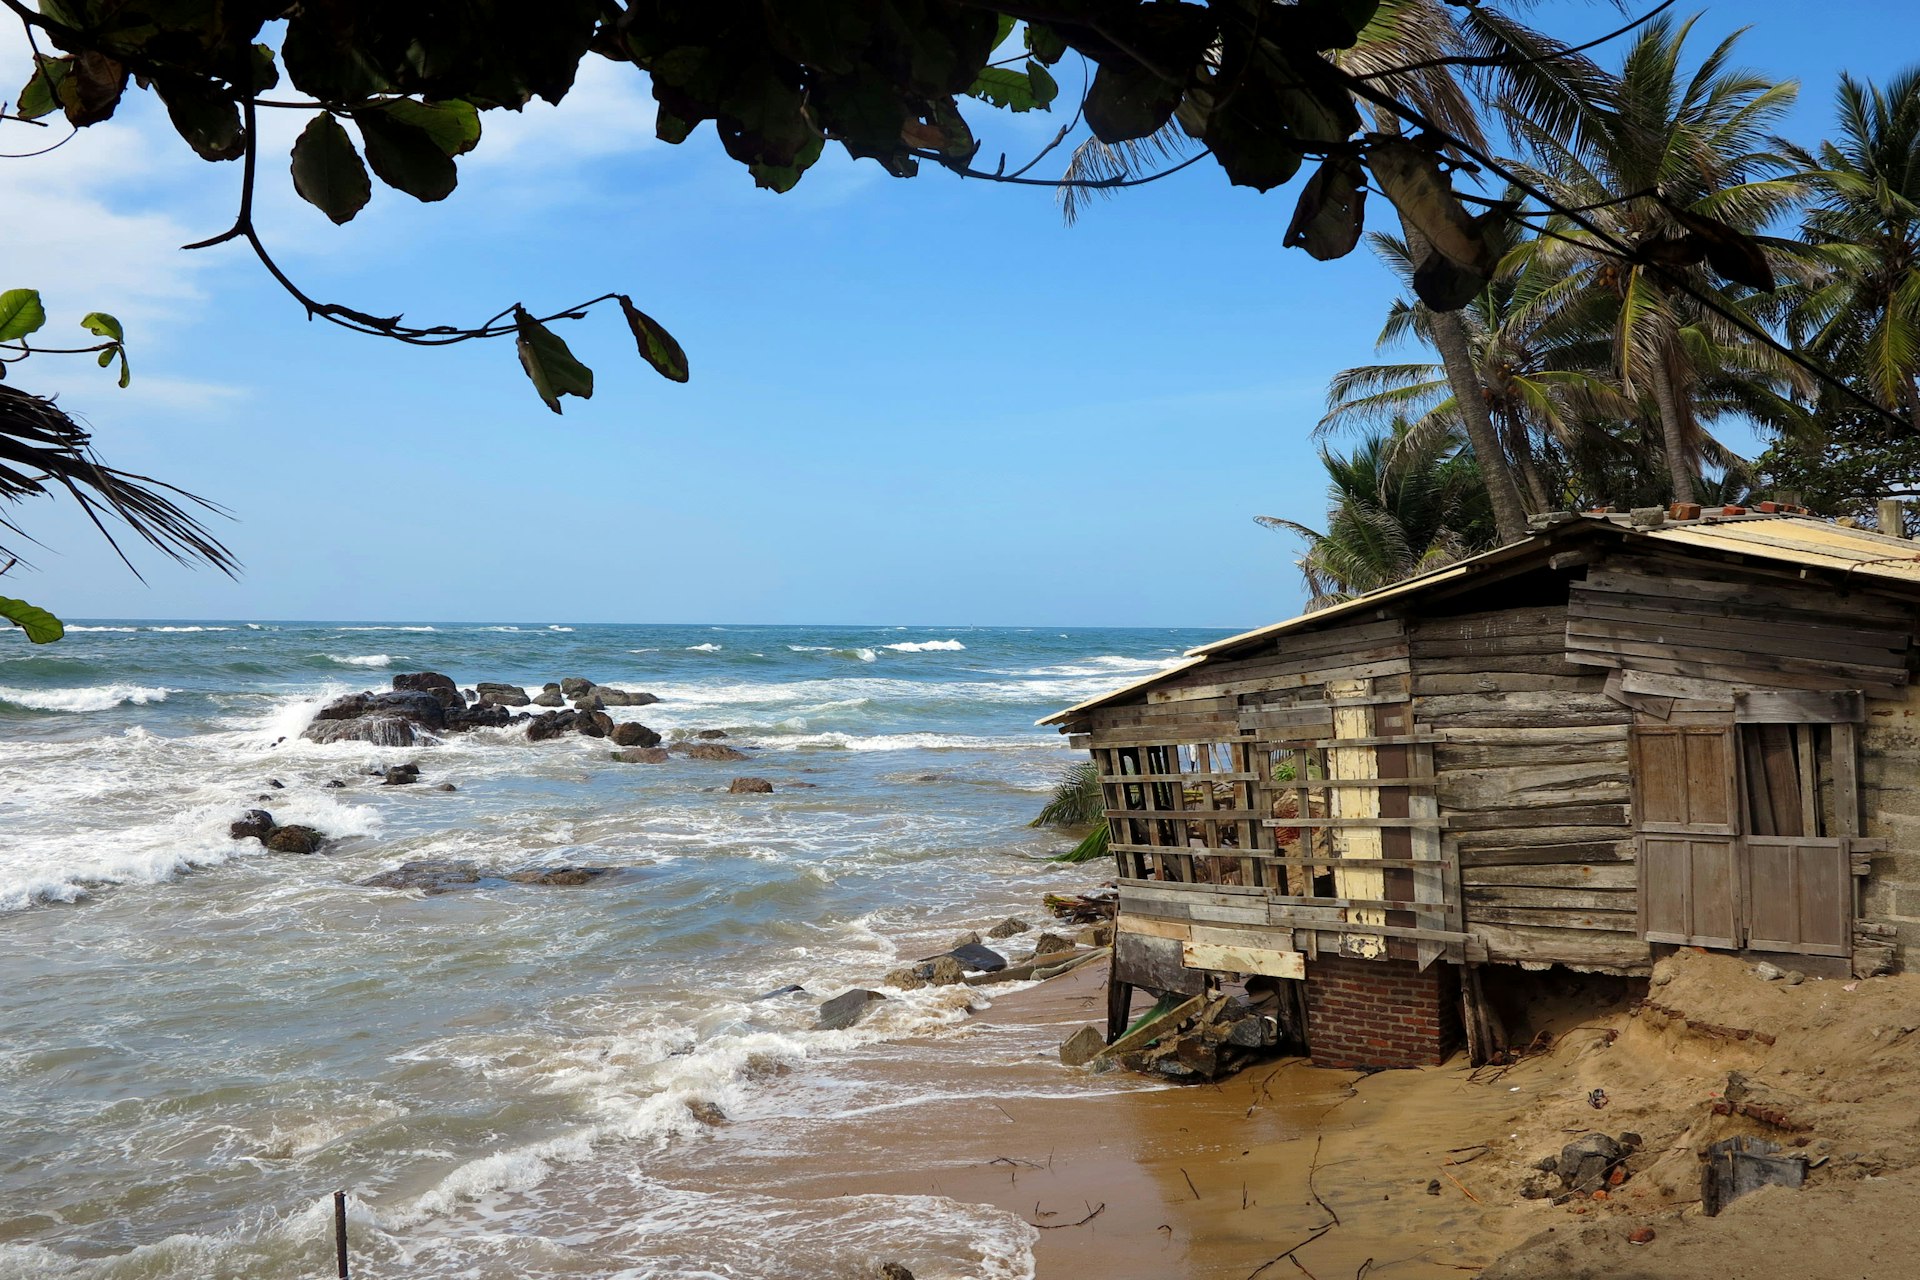 The ramshackle charm of Mount Lavinia Beach © Natalie Blow / Lonely Planet 